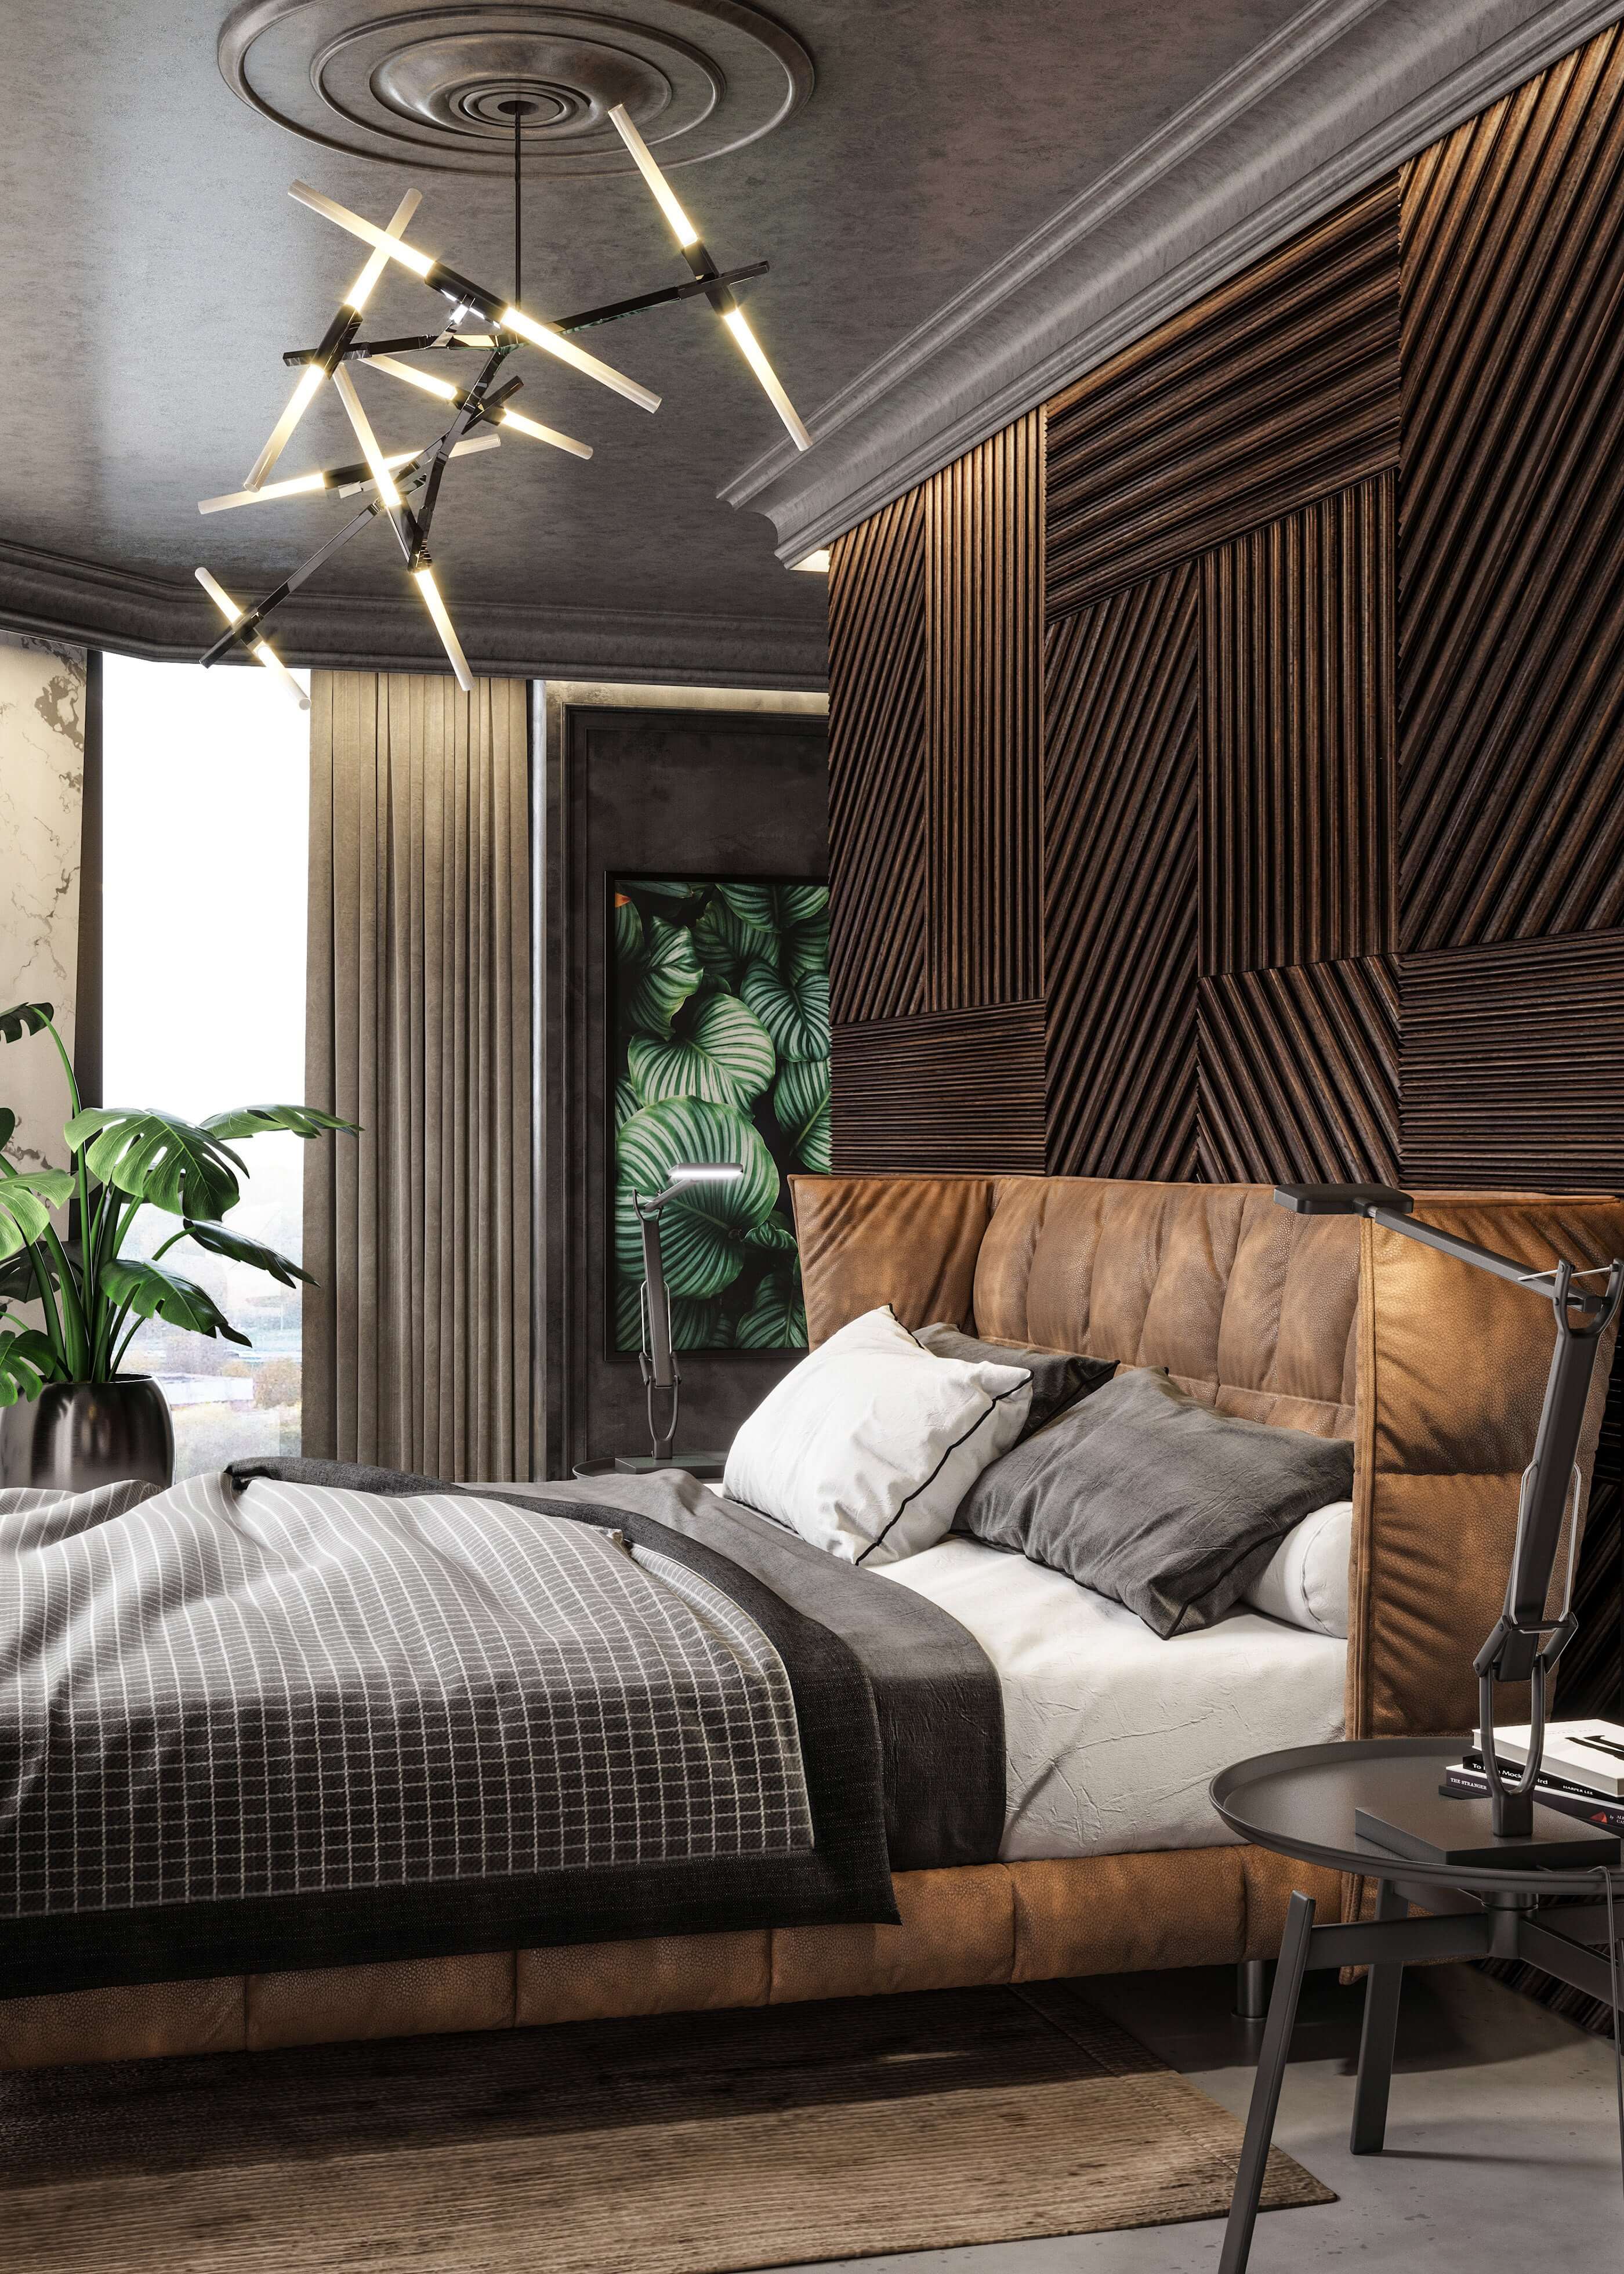 Interior Apartment project Pluses bedroom brown leather bed - cgi visualization